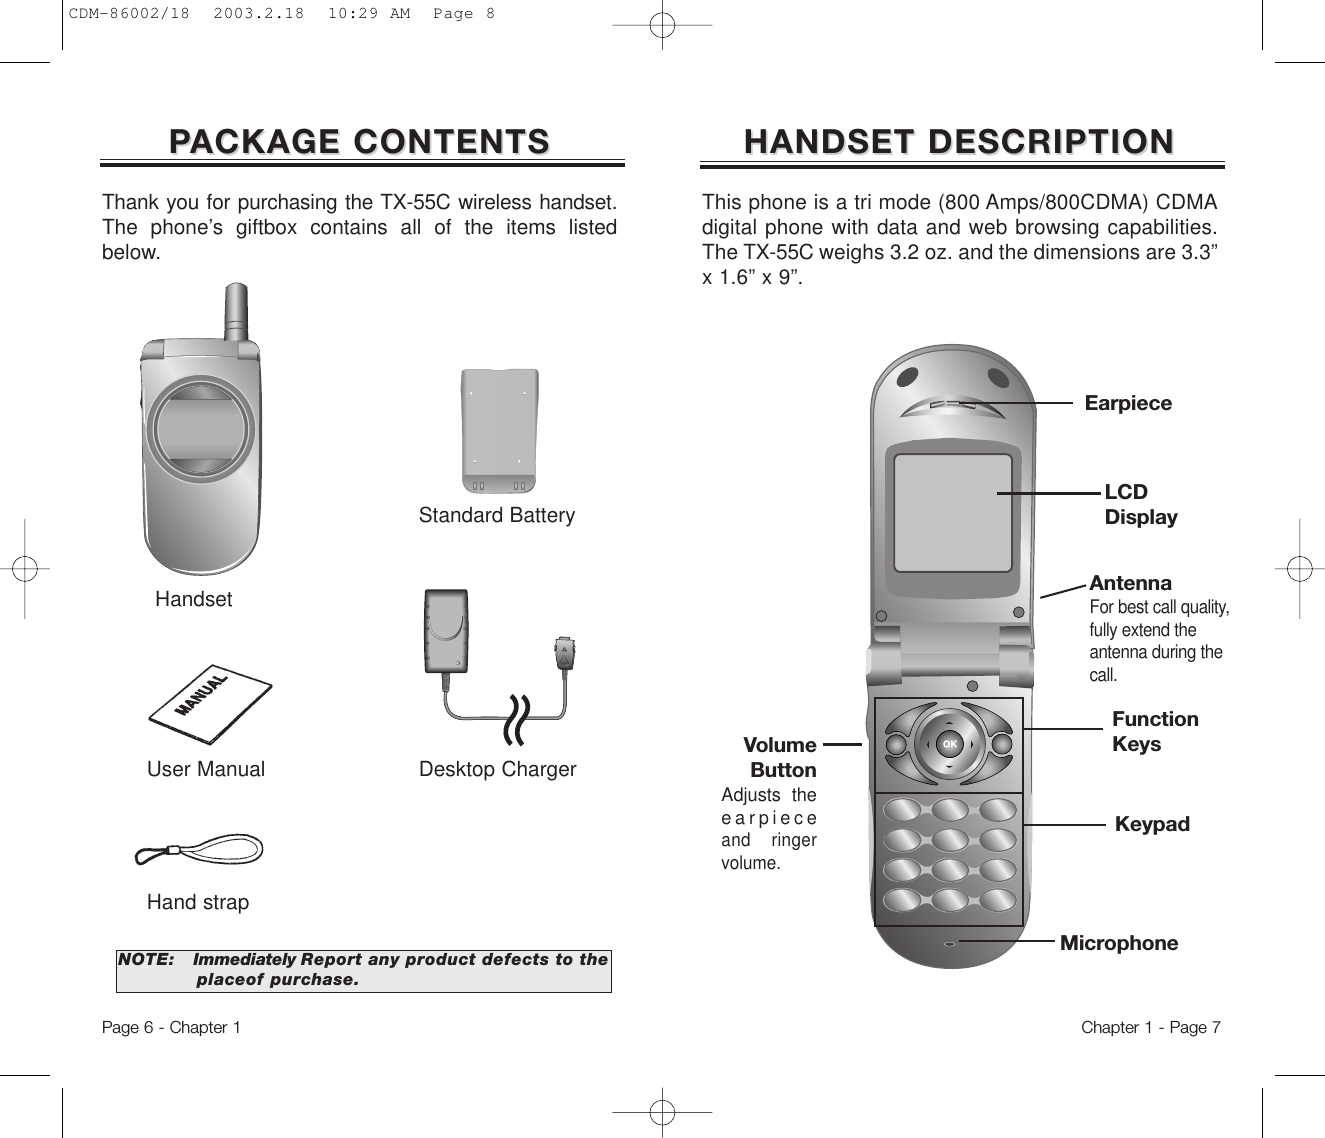 HANDSET DESCRIPTIONHANDSET DESCRIPTIONVolumeButtonAdjusts theearpieceand ringervolume.EarpieceFunctionKeysKeypadMicrophoneThis phone is a tri mode (800 Amps/800CDMA) CDMAdigital phone with data and web browsing capabilities.The TX-55C weighs 3.2 oz. and the dimensions are 3.3”x 1.6” x 9”.Chapter 1 - Page 7PPACKAGE CONTENTSACKAGE CONTENTSThank you for purchasing the TX-55C wireless handset.The phone’s giftbox contains all of the items listedbelow.NOTE: Immediately Report any product defects to the  placeof purchase.User Manual Desktop ChargerHand strapHandsetStandard BatteryPage 6 - Chapter 1AntennaFor best call quality,fully extend theantenna during thecall.LCDDisplayCDM-86002/18  2003.2.18  10:29 AM  Page 8